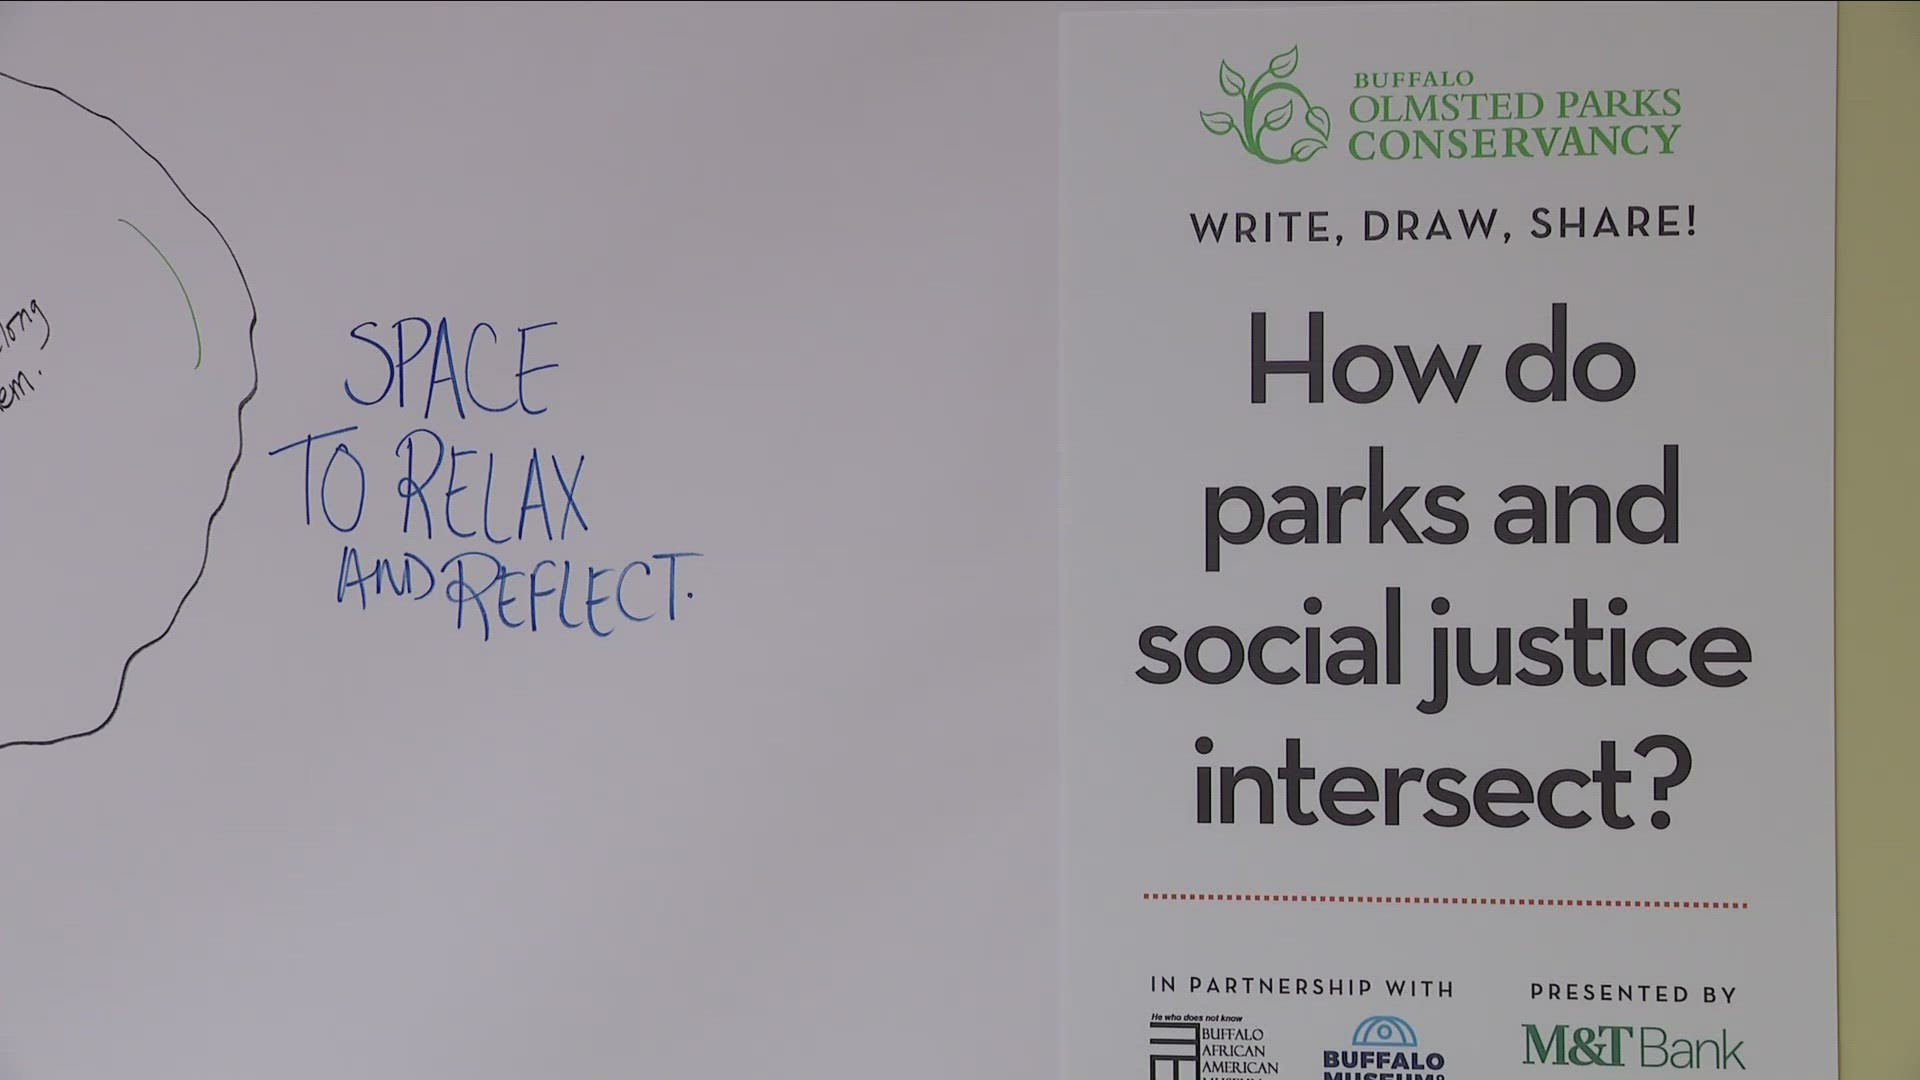 The Buffalo Science Museum hosted a conversation to explore social justice and parks